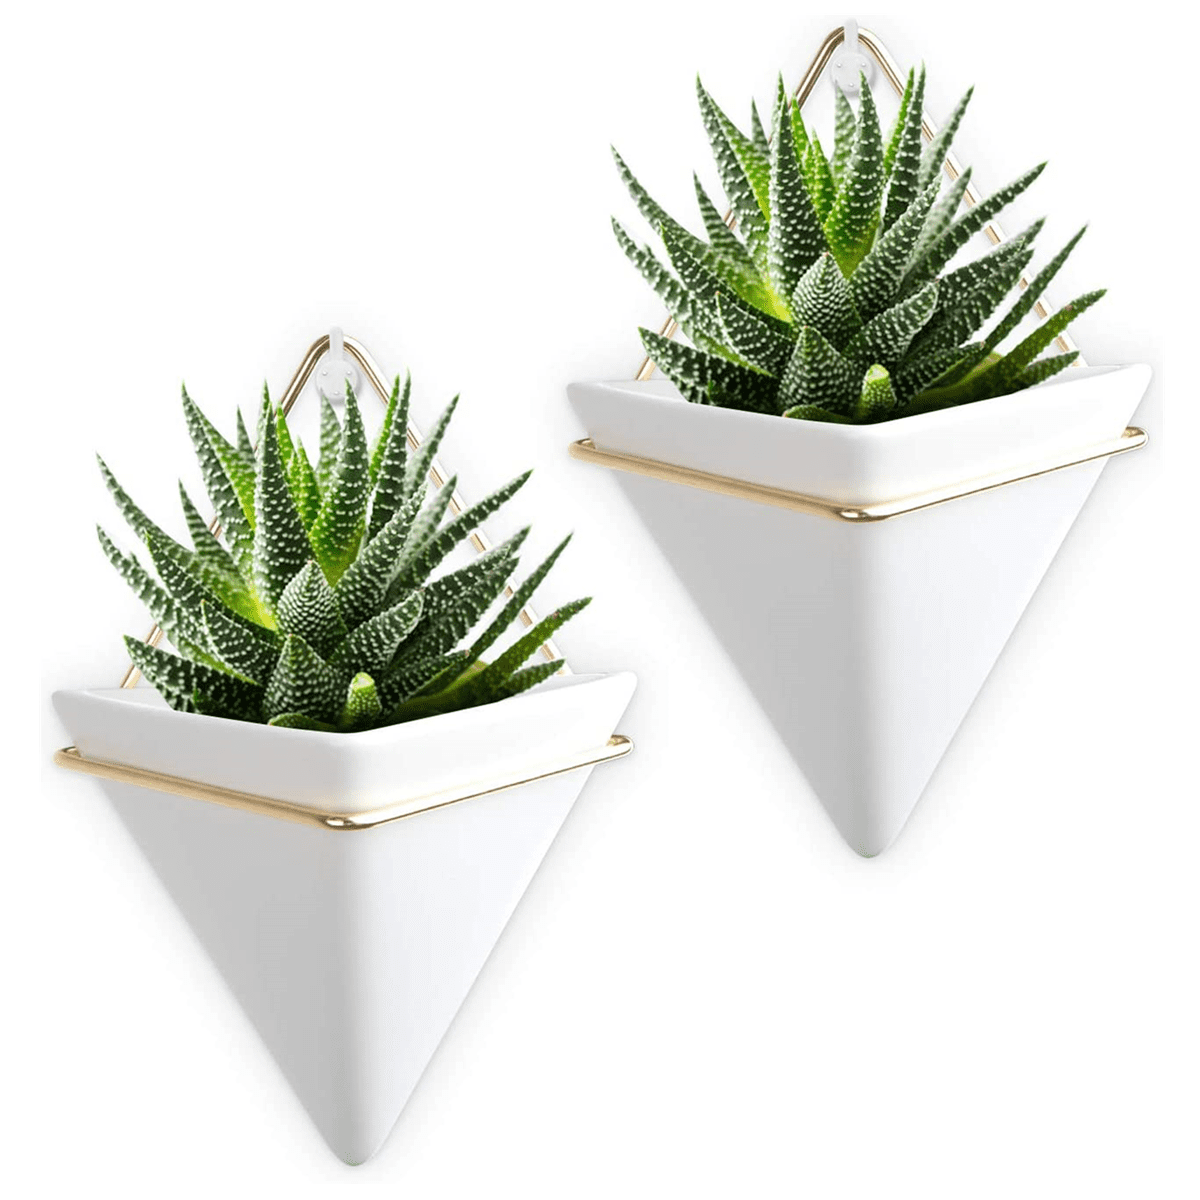 Trending Hanging Triangular Geo Planter White for Succulents and Air Plants